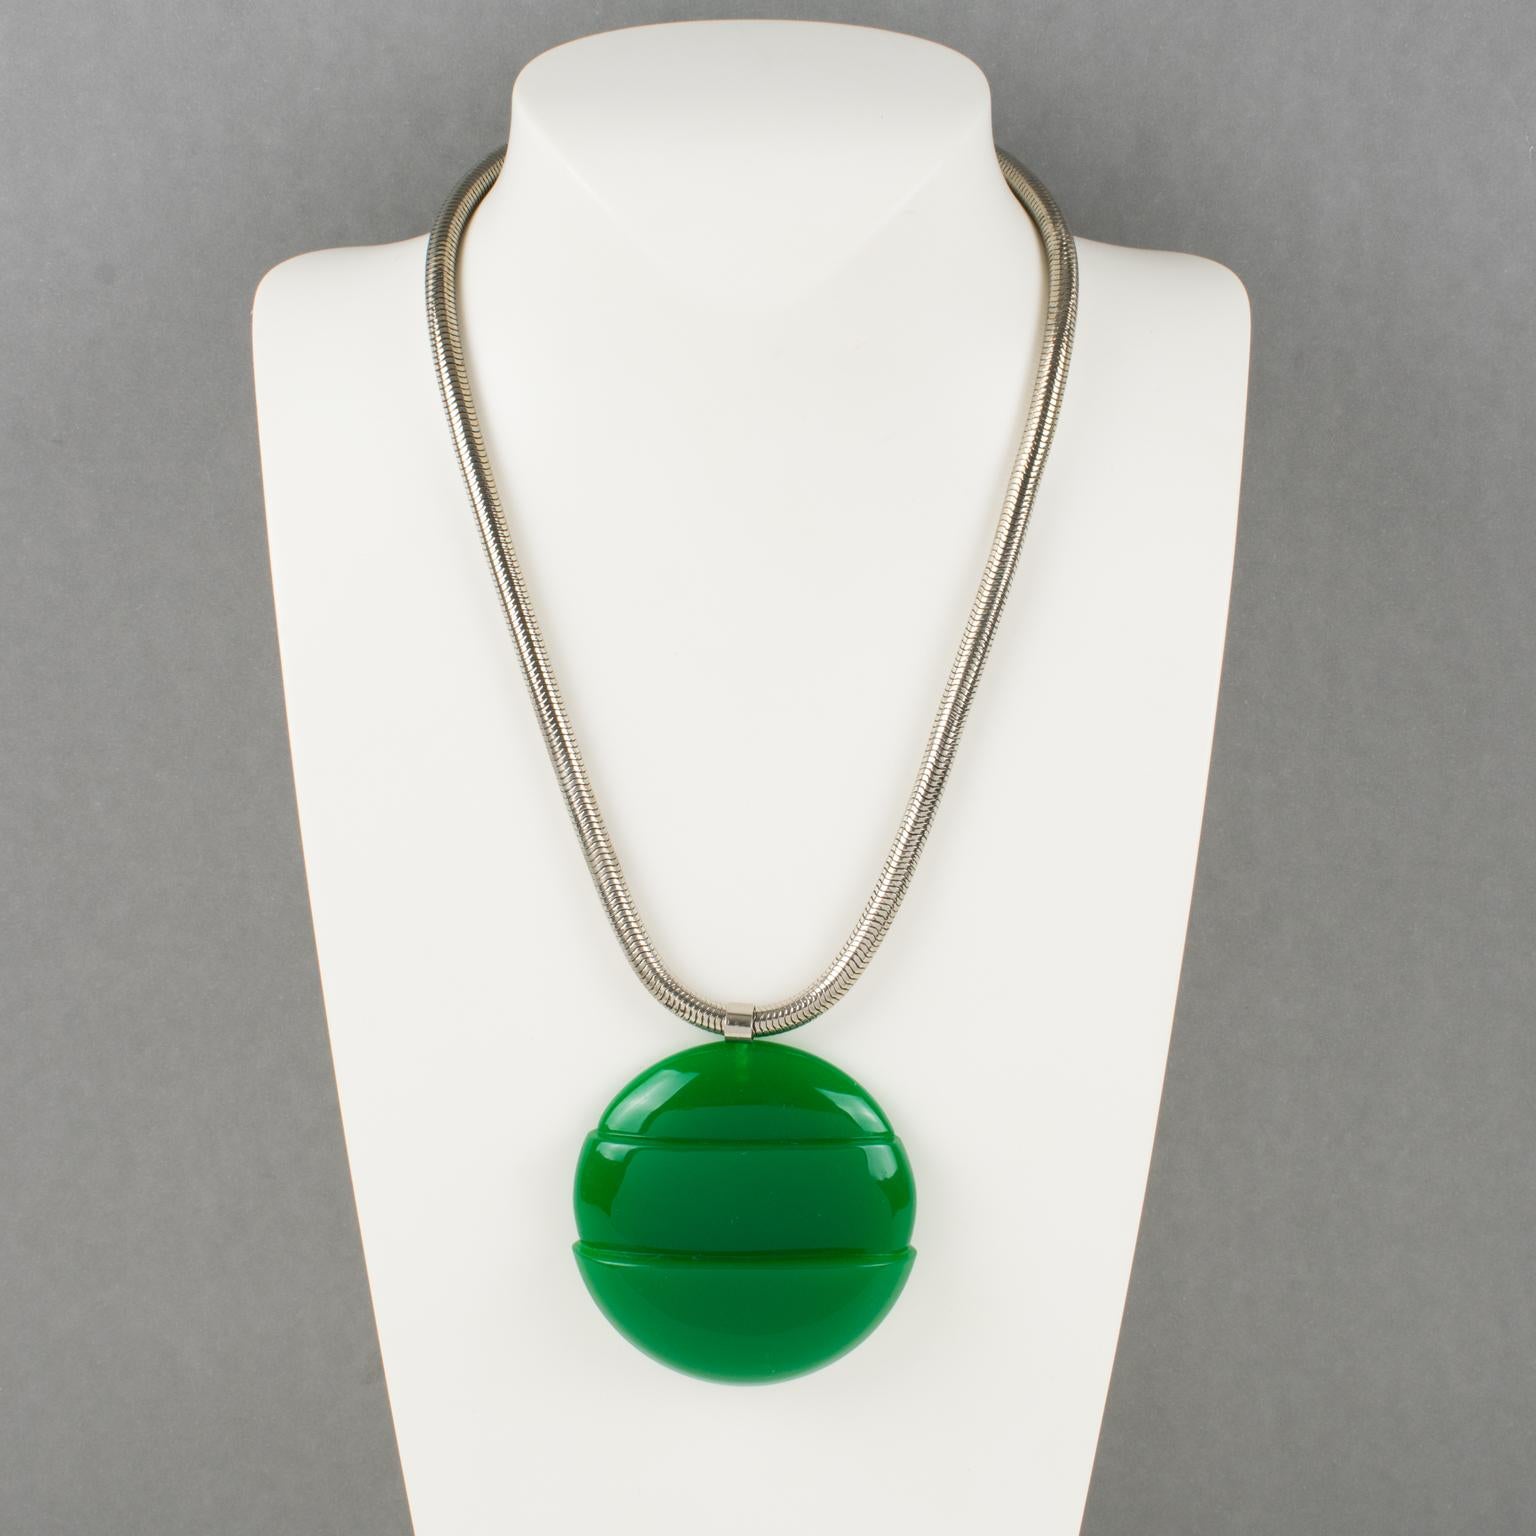 Lanvin Paris Modernist Green Lucite Medallion Necklace with Snake Chain, 1970s In Good Condition For Sale In Atlanta, GA